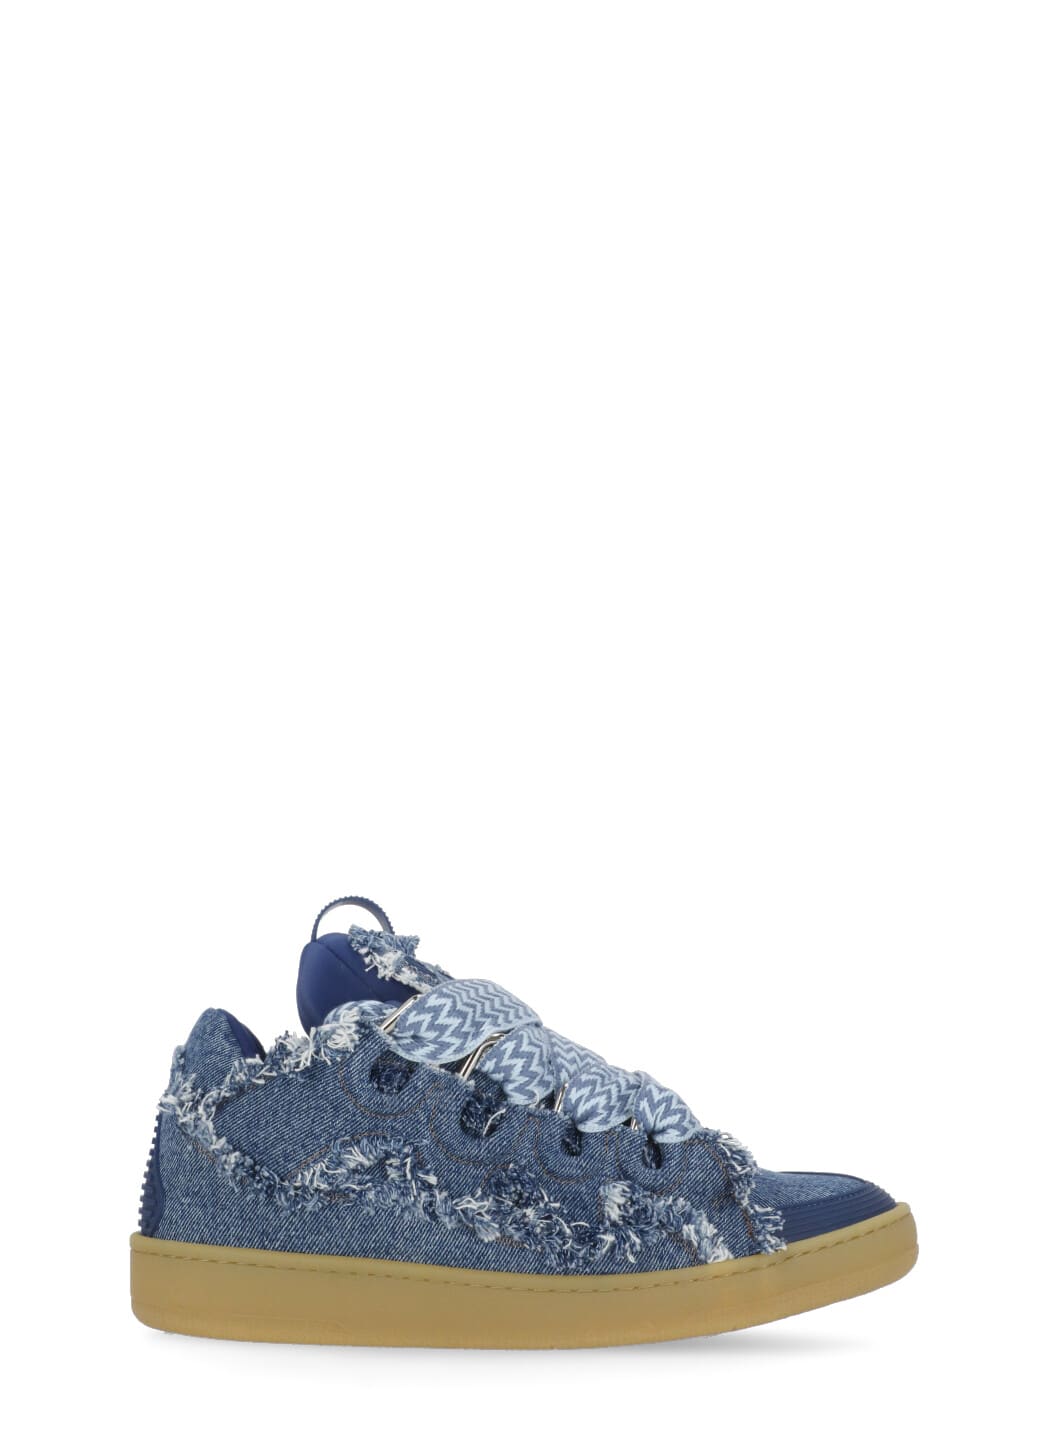 Curb Sneakers In Blue Cotton